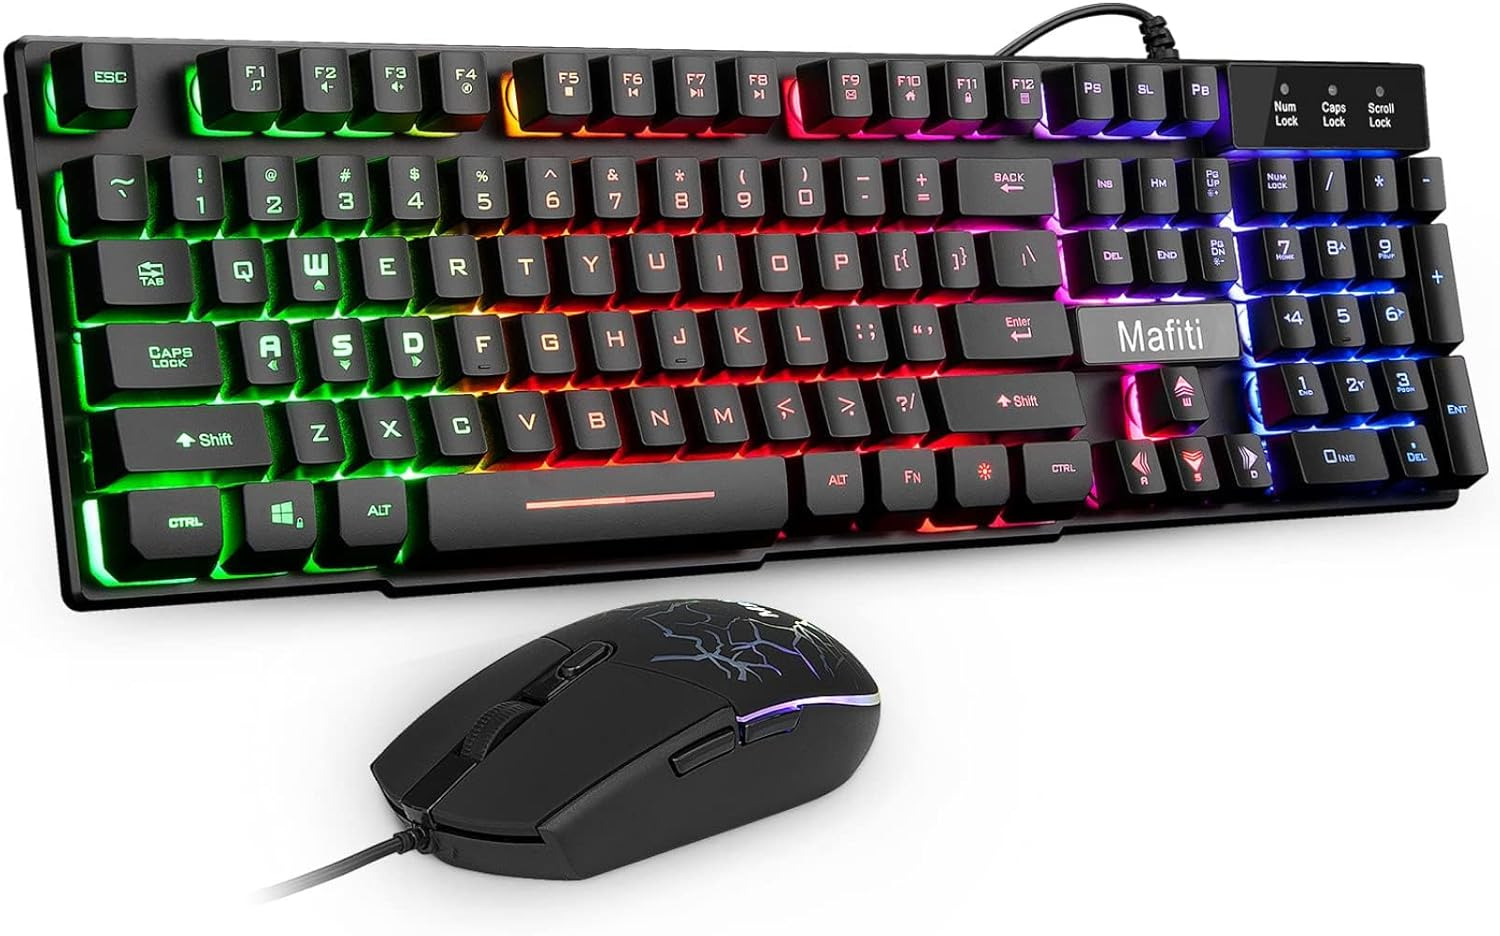 RK101 Computer Keyboard Mouse Combo Wired, RGB Backlit USB Keyboard for PC 